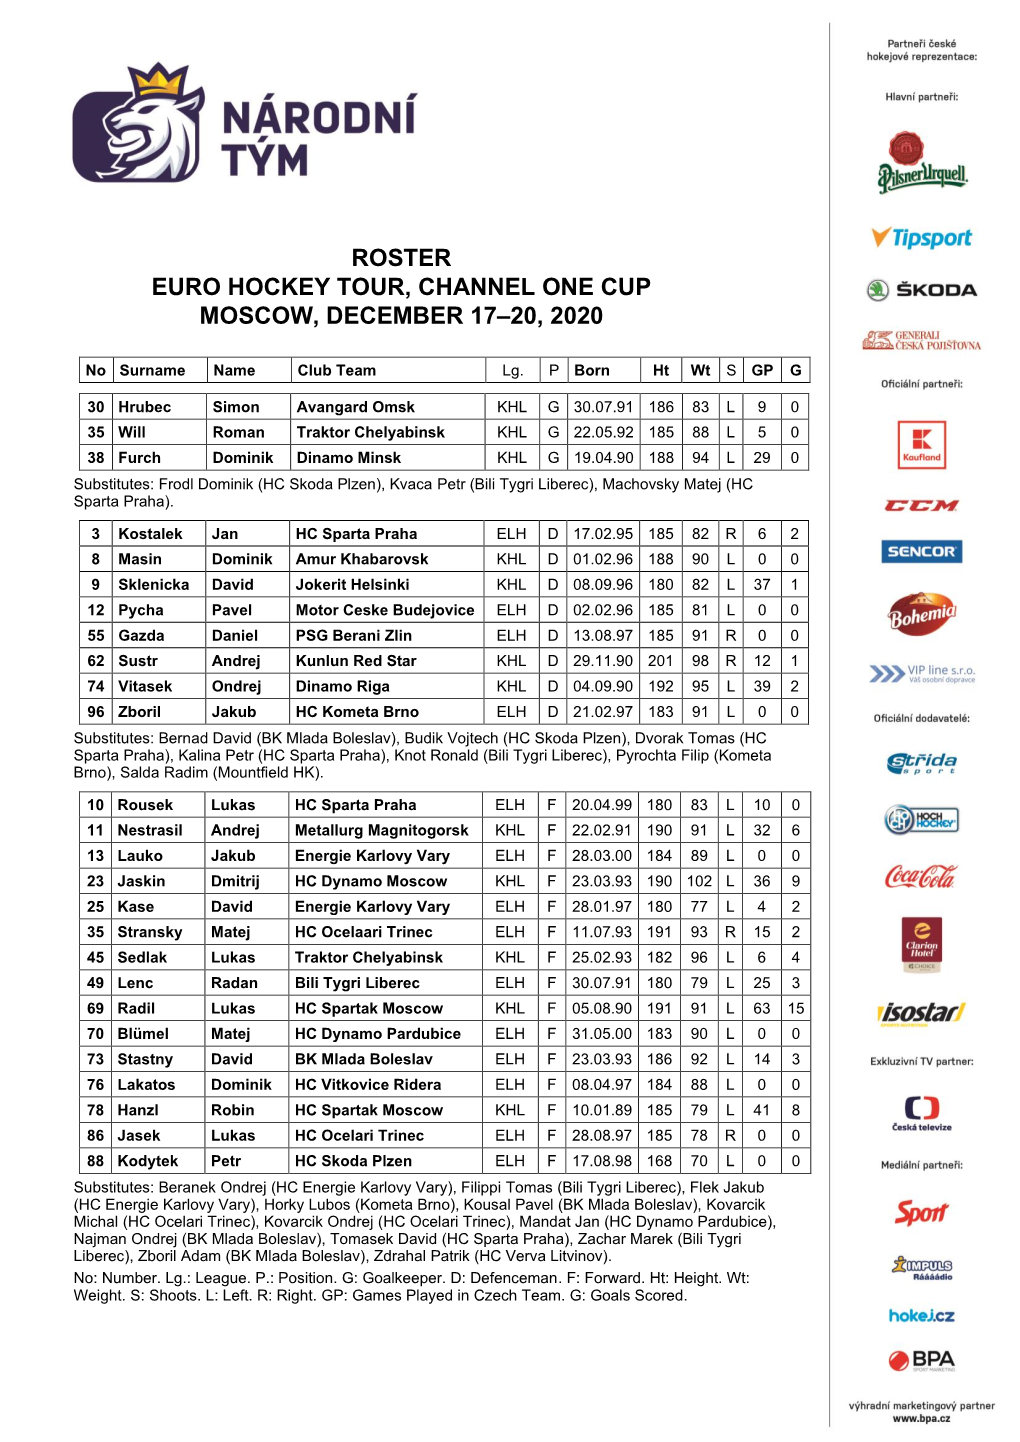 Roster Euro Hockey Tour, Channel One Cup Moscow, December 17–20, 2020